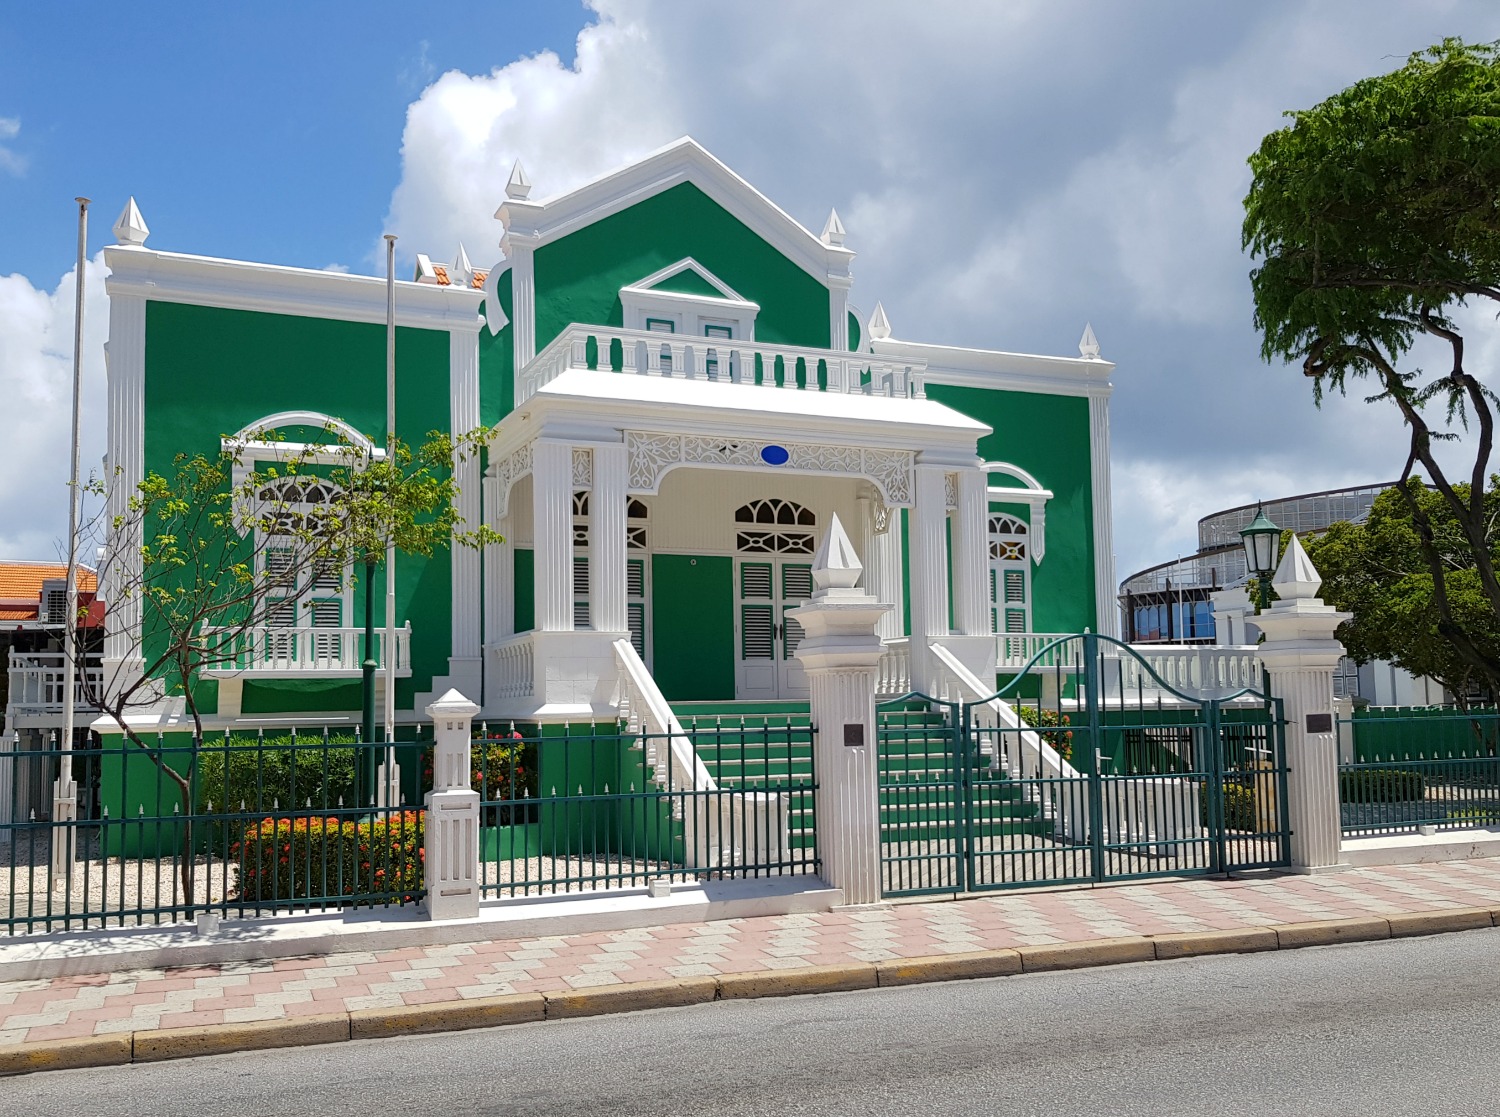 The bright green and white building of the Oranjestad town hall in Aruba